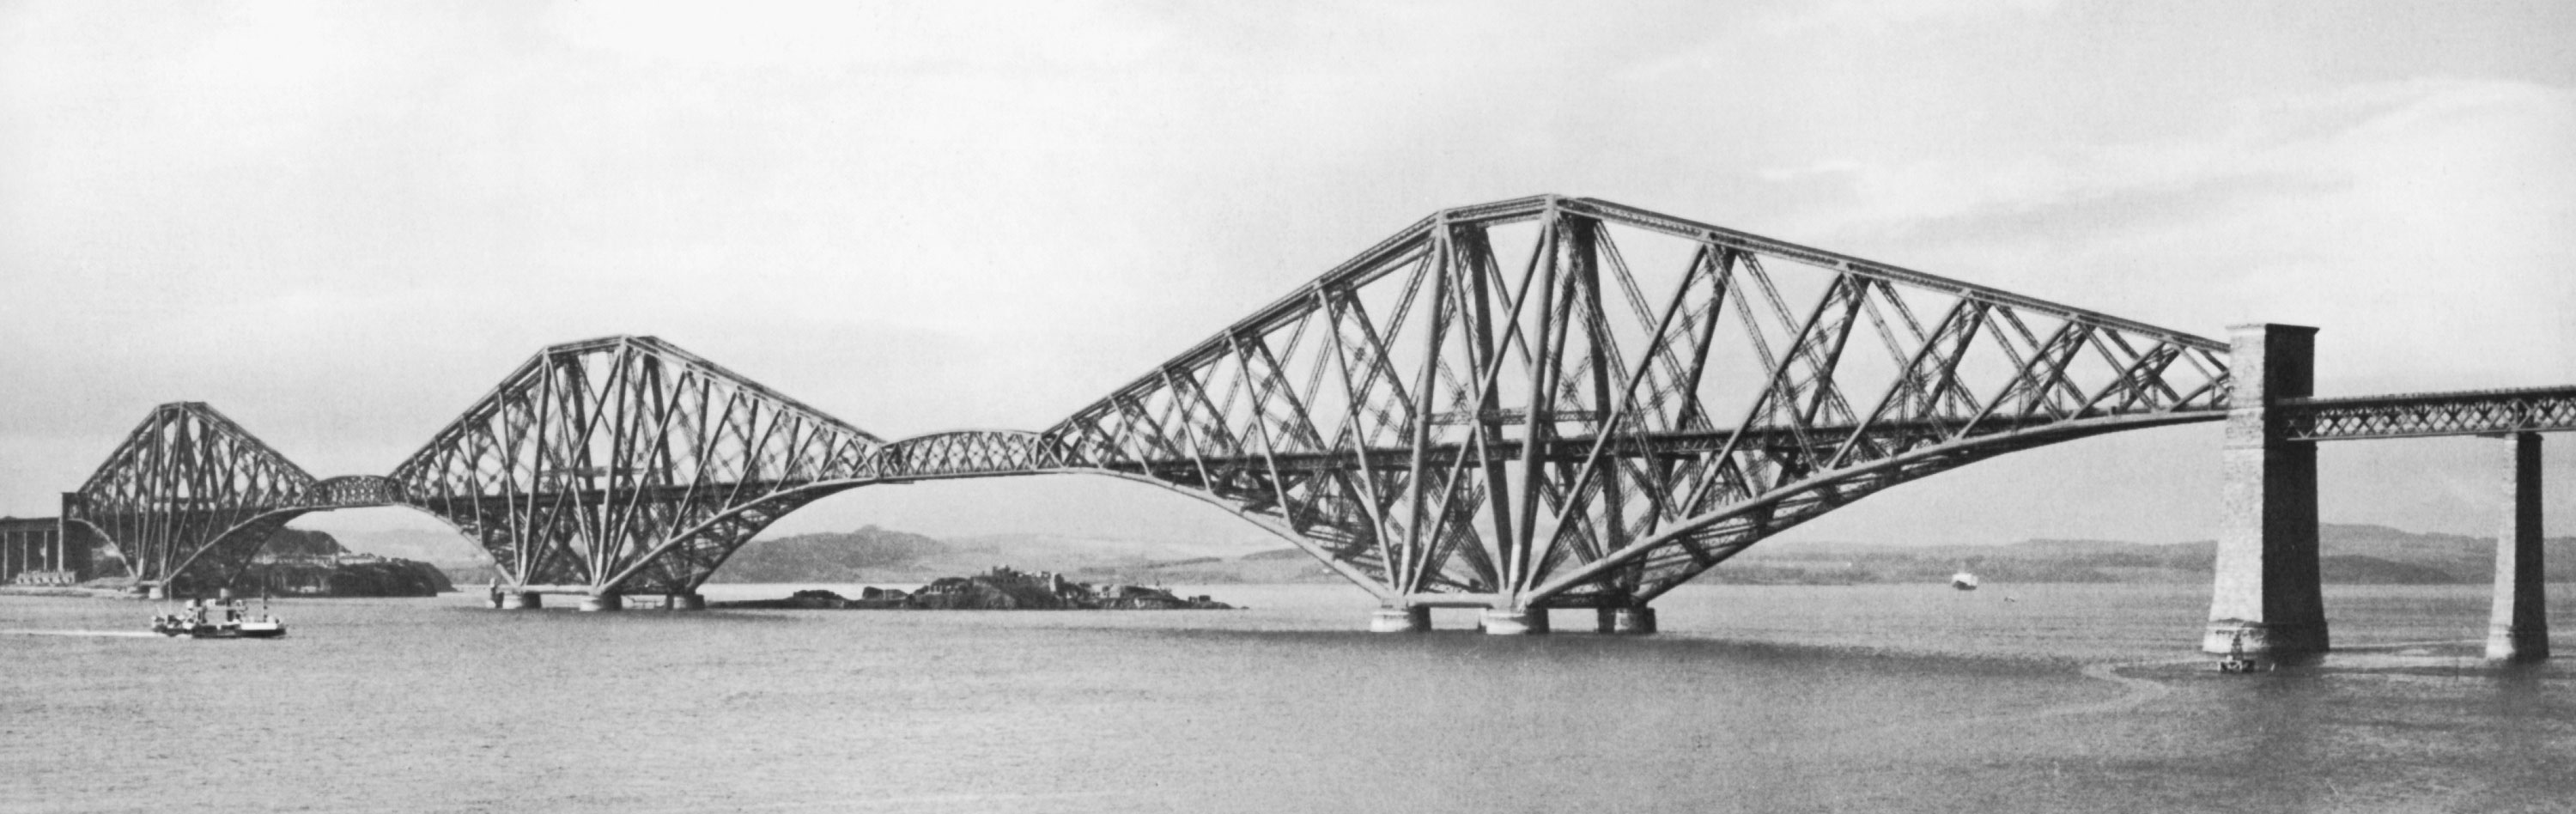 The Forth Bridge after completion in 1890. Wikimedia Commons.